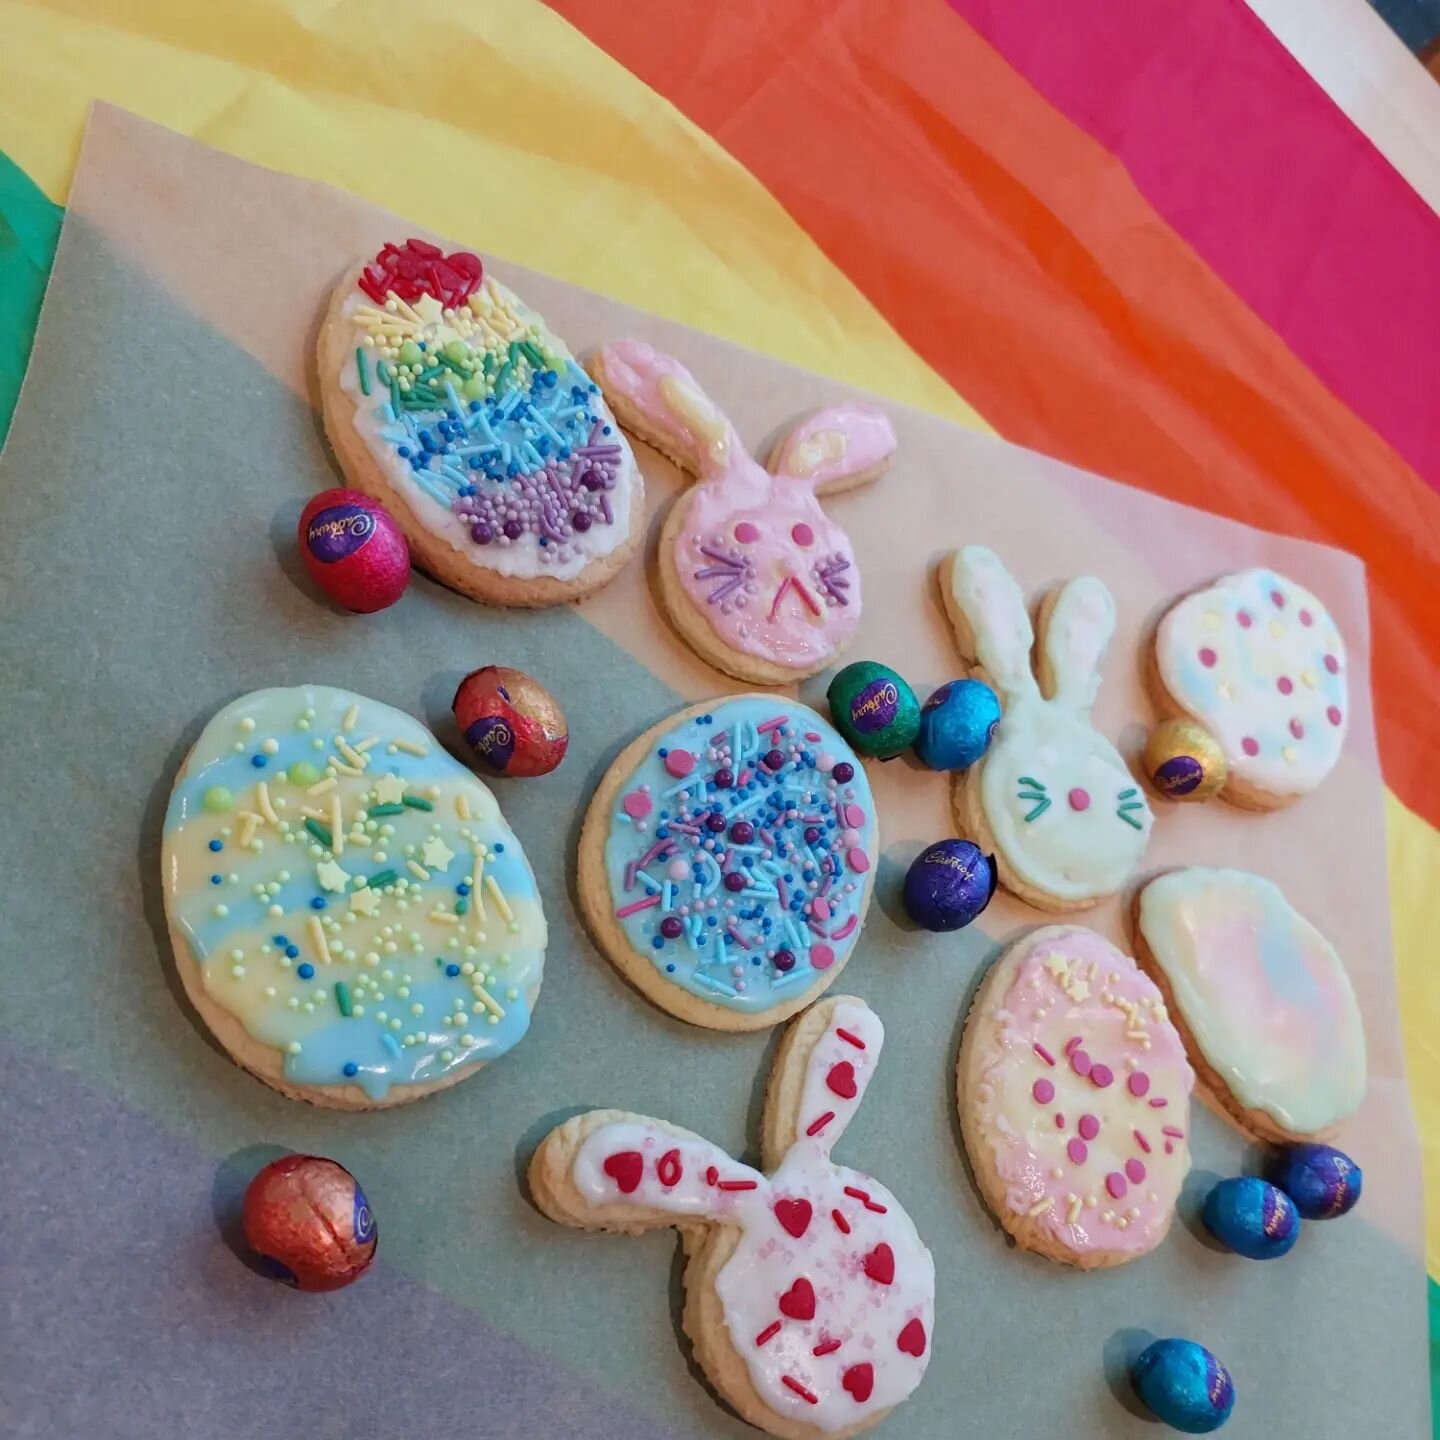 We decorated some cookies!! Thanks to our facilitator Lydia for making the cookies and icing!! It was really fun (and tasty!). Happy Easter to anyone who celebrates 🥚🐰